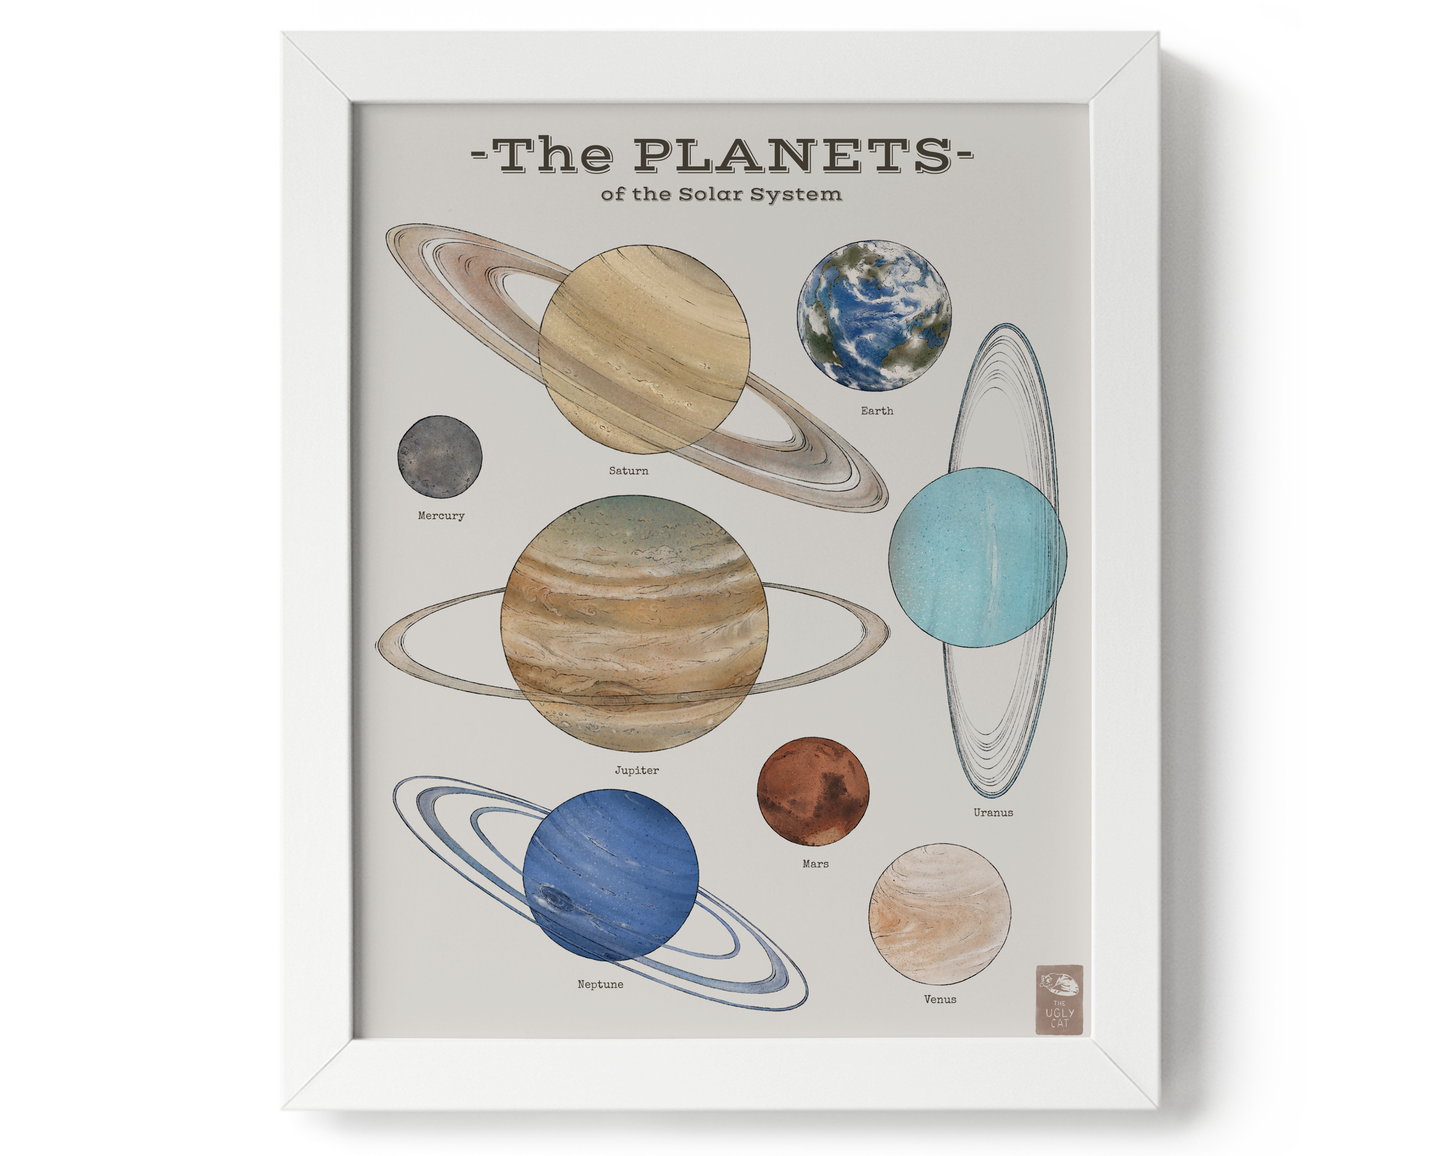 "The Planets" by Catherine Hébert - Solar System Planet Chart Giclee Art Print - 8"x10" size